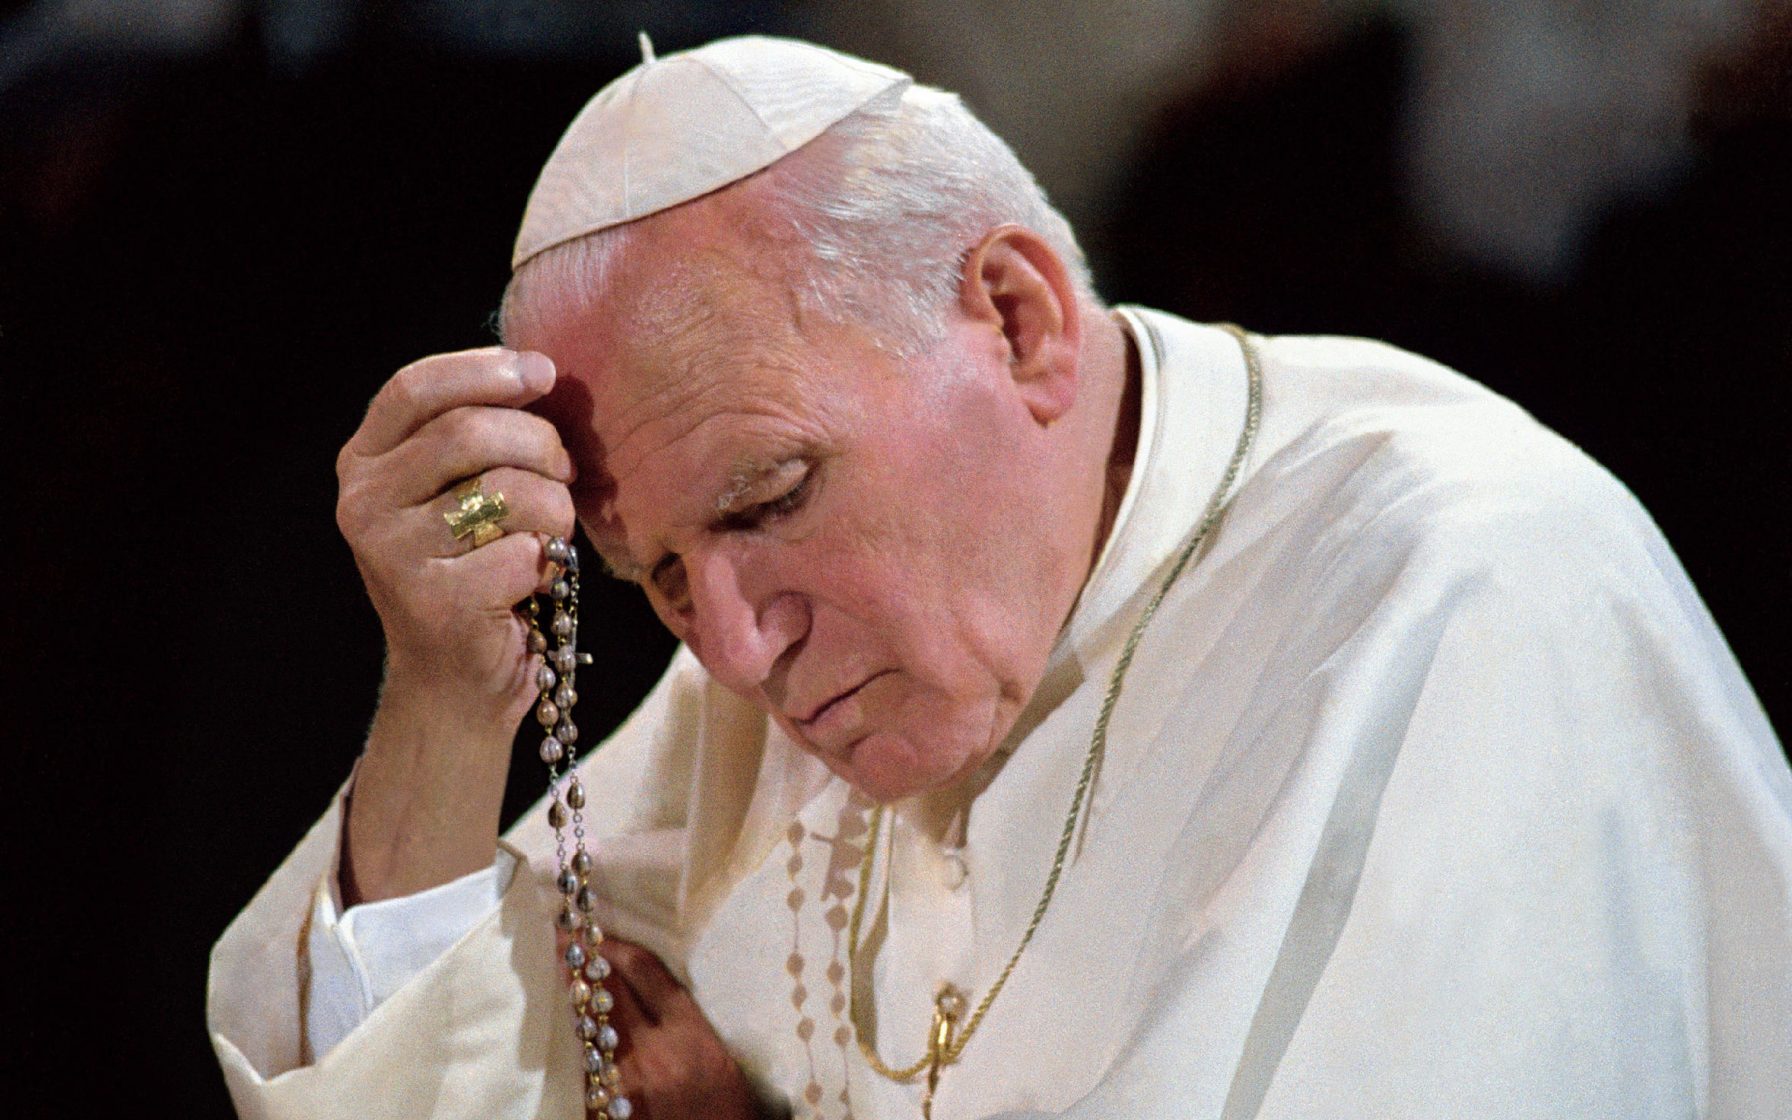 What John Paul II teach us about moving beyond fear